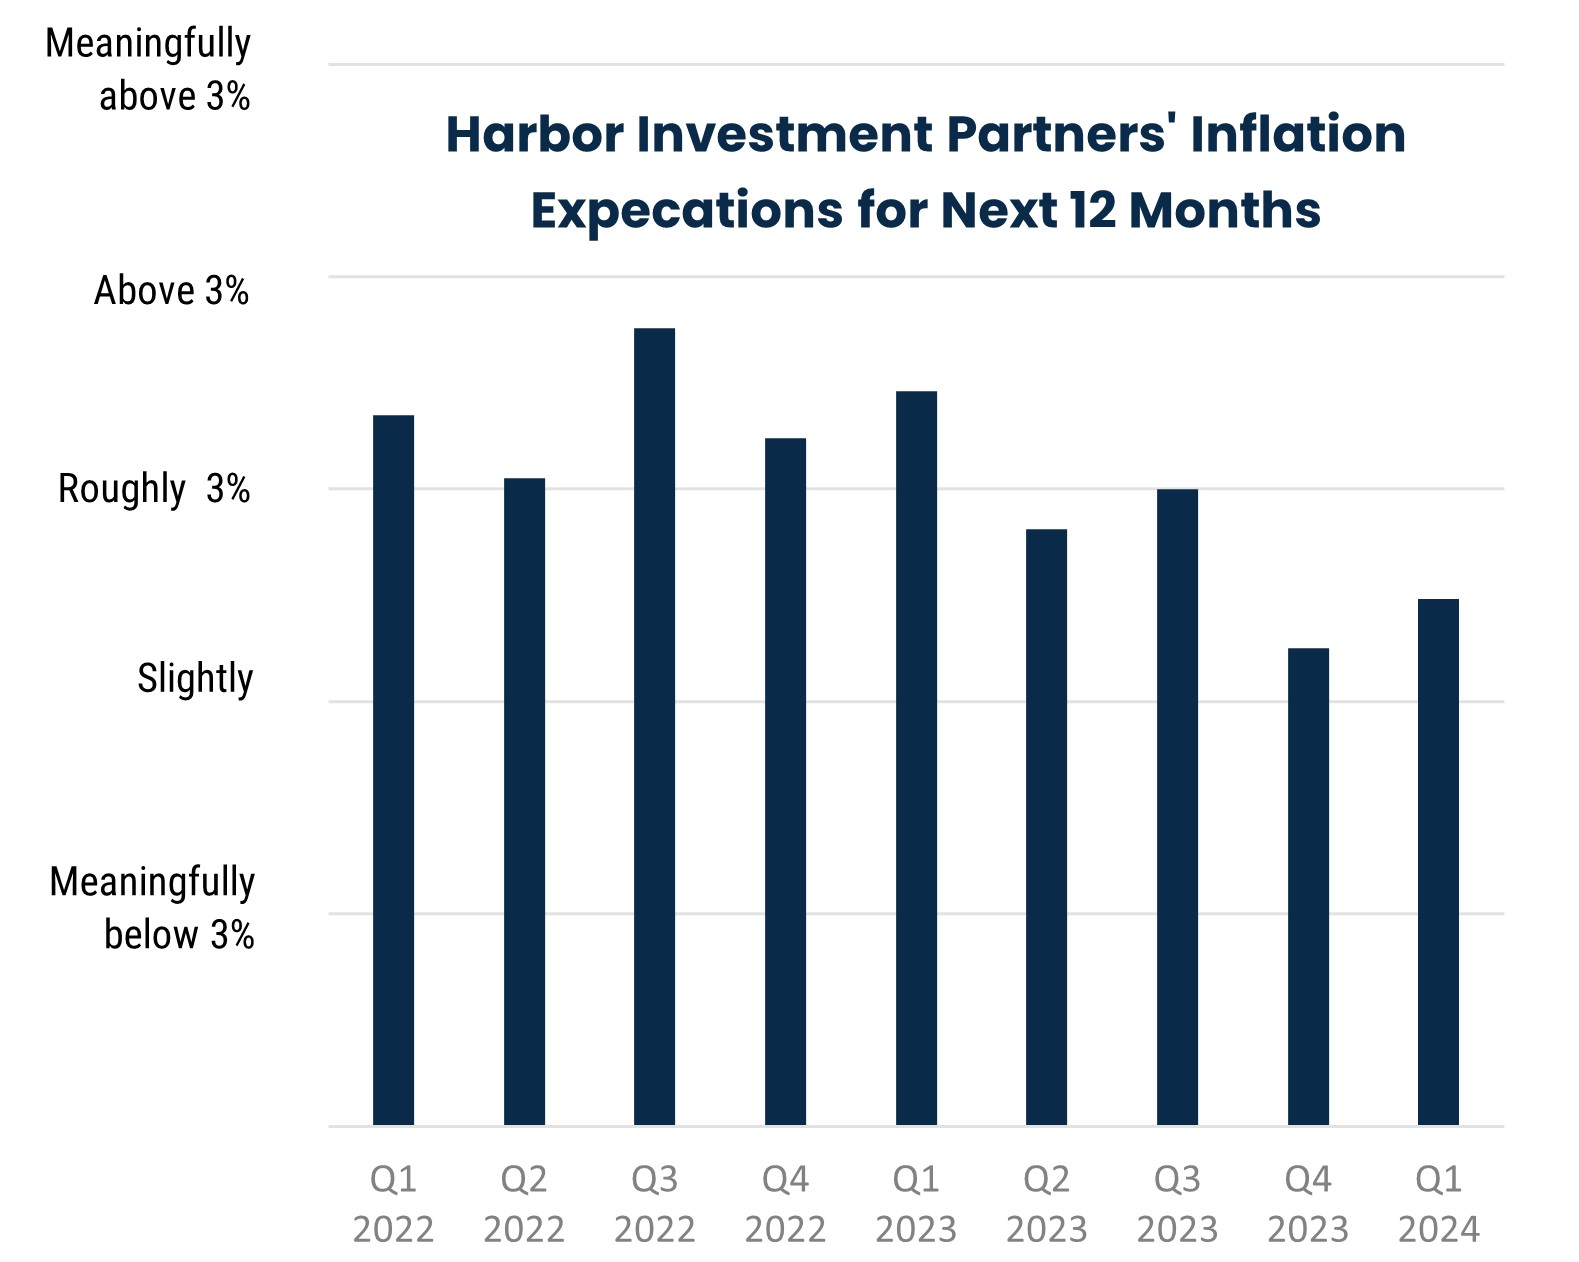 Harbor Investment Partners' Inflation Expecations for Next 12 Months